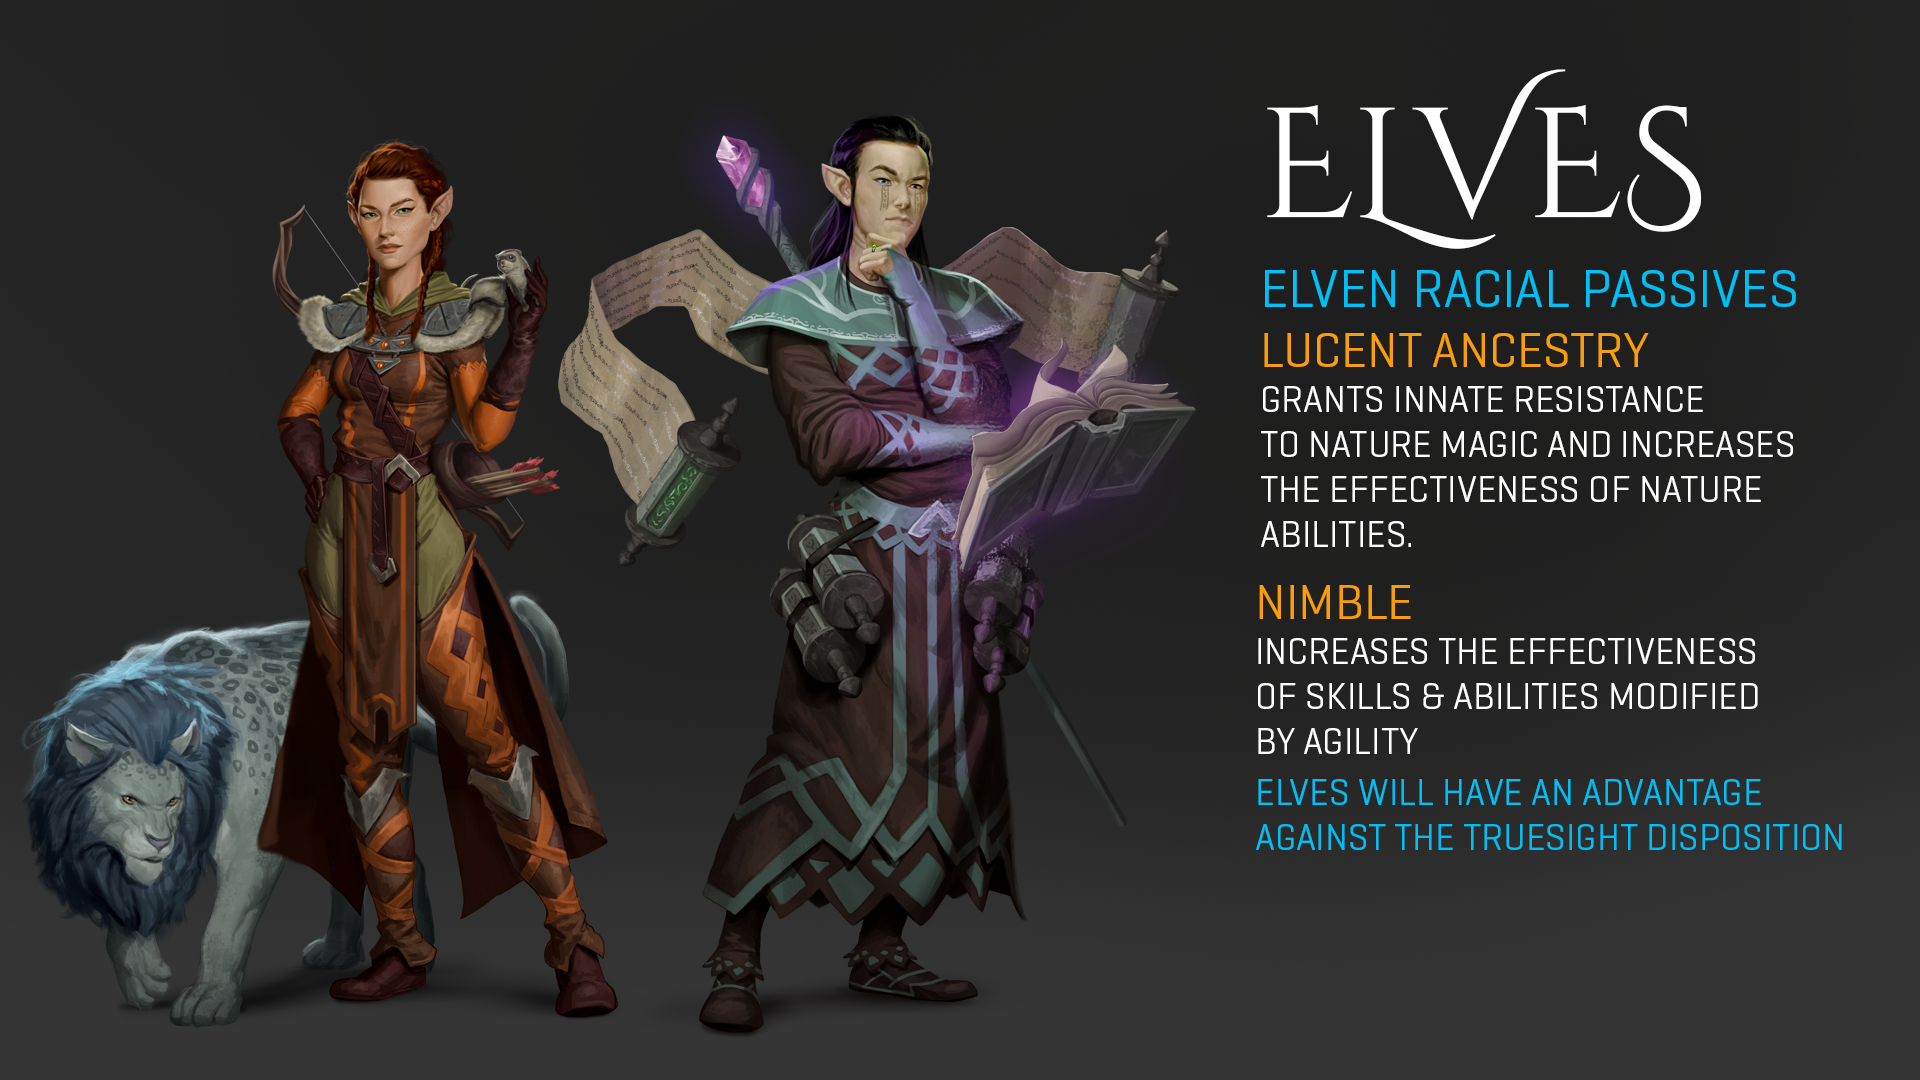 2019-Oct 30: Elf racial passives listed with concept art